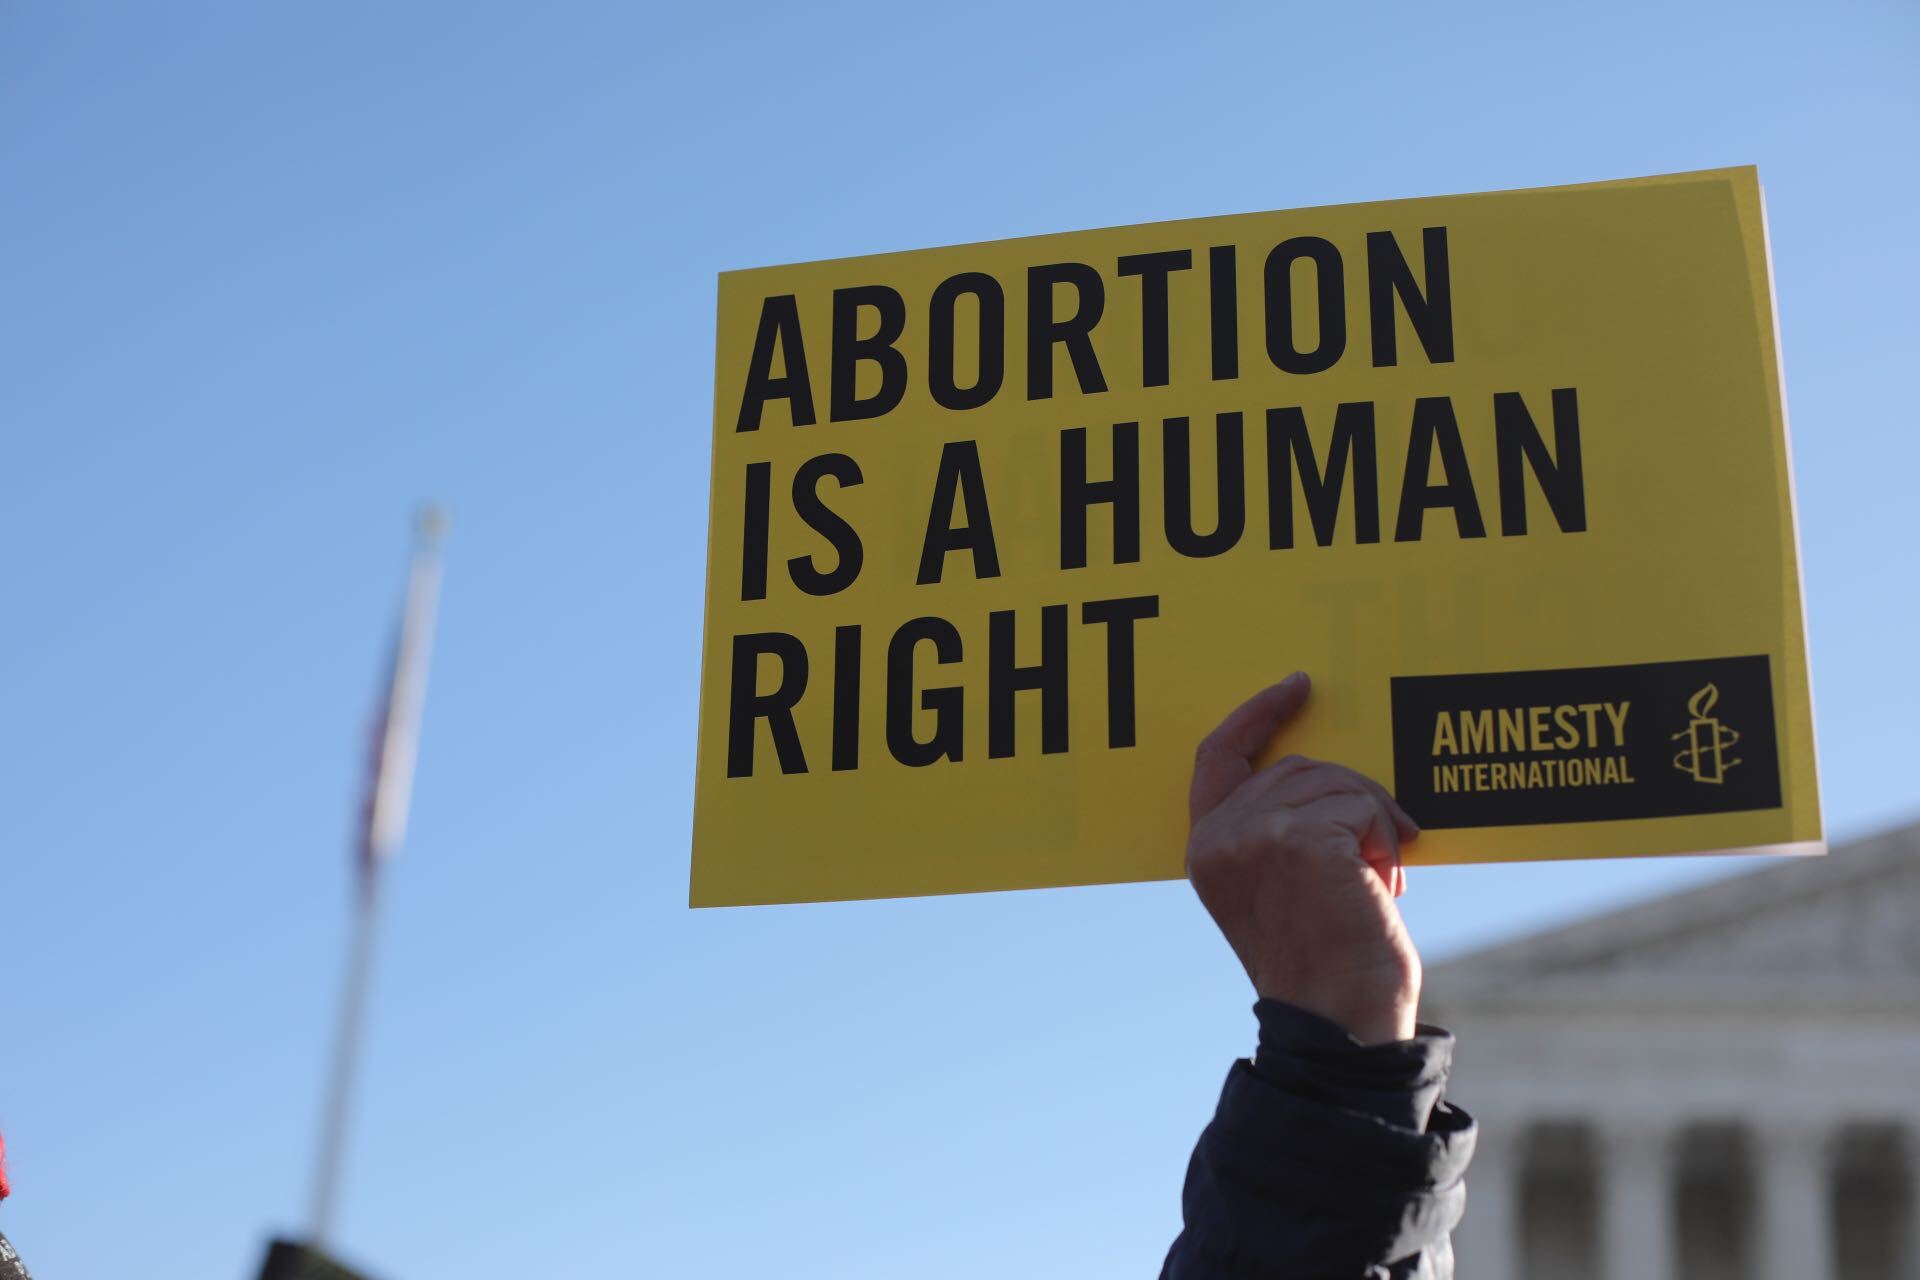 USA: Supreme Court Leaked Opinion to Overturn Abortion Rights Is an Egregious Violation of Human Rights